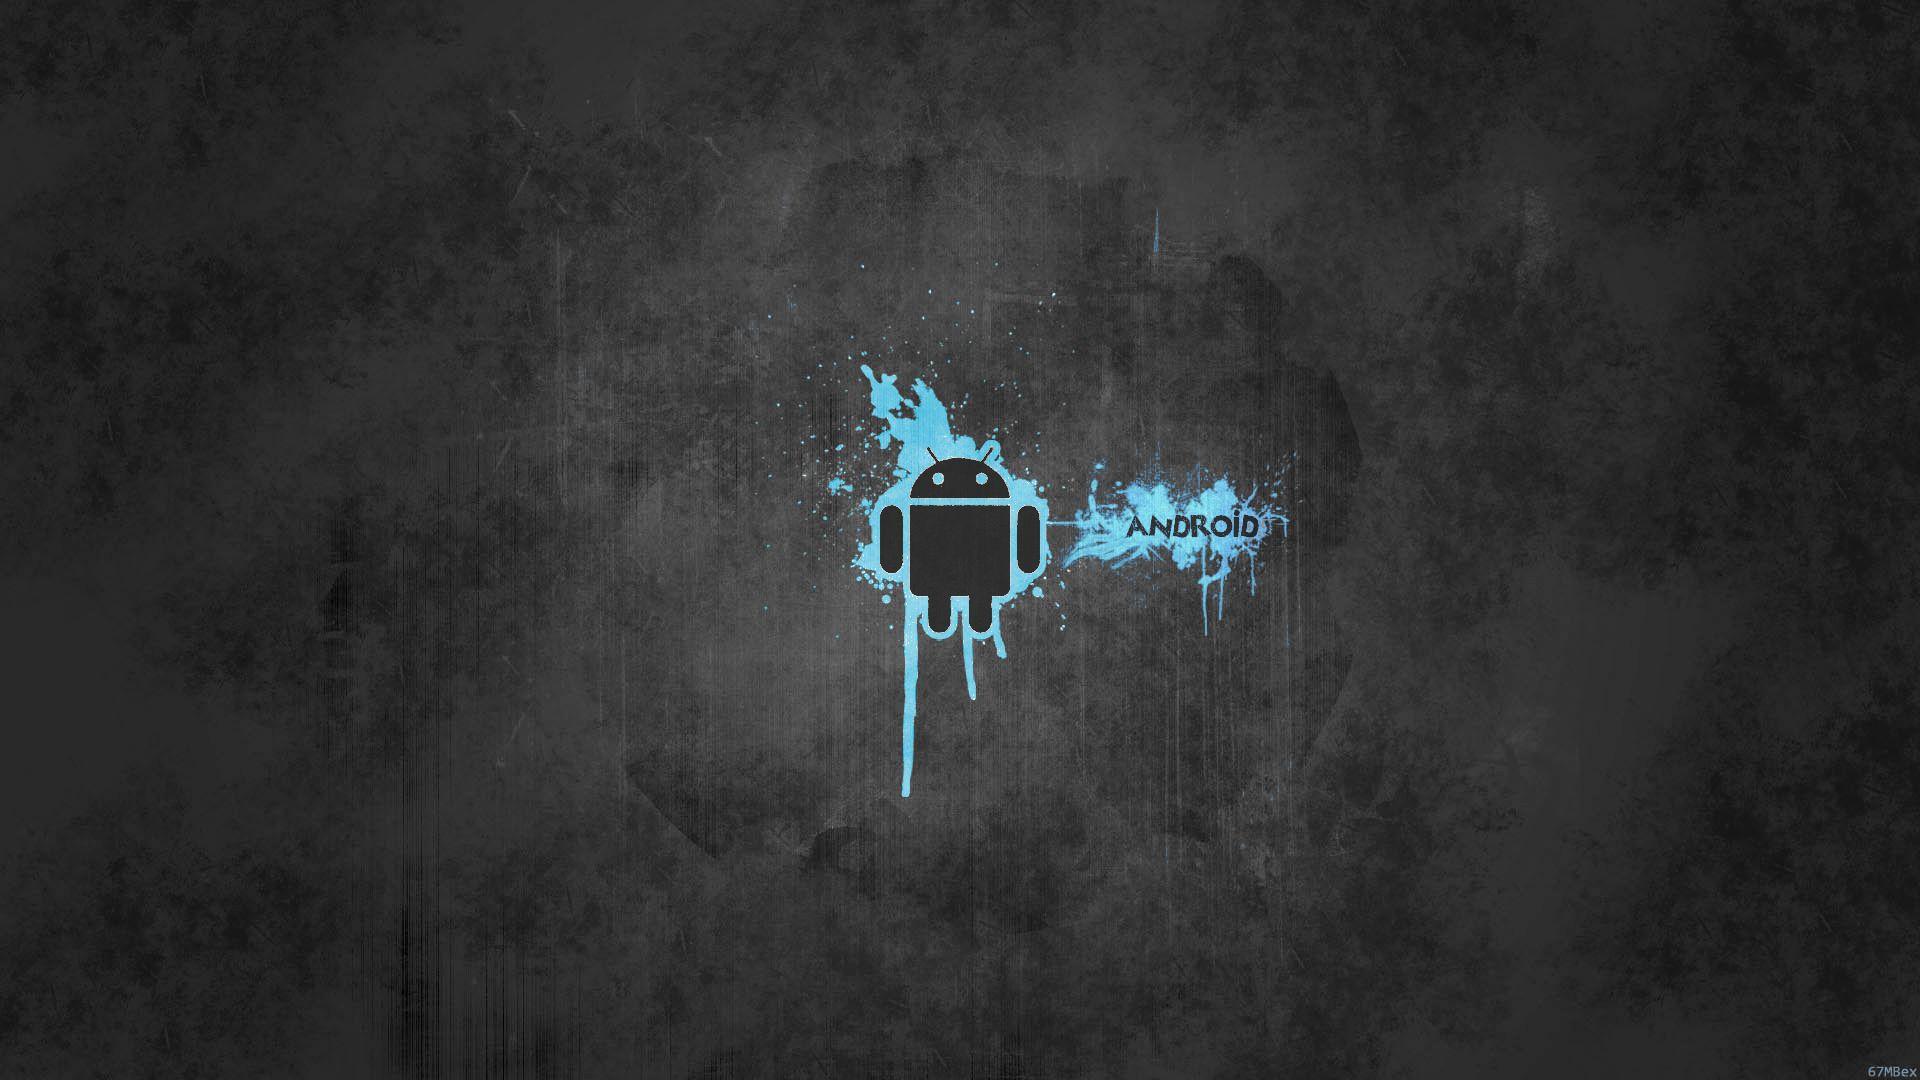 Simple Blue Android HD Image Wallpaper